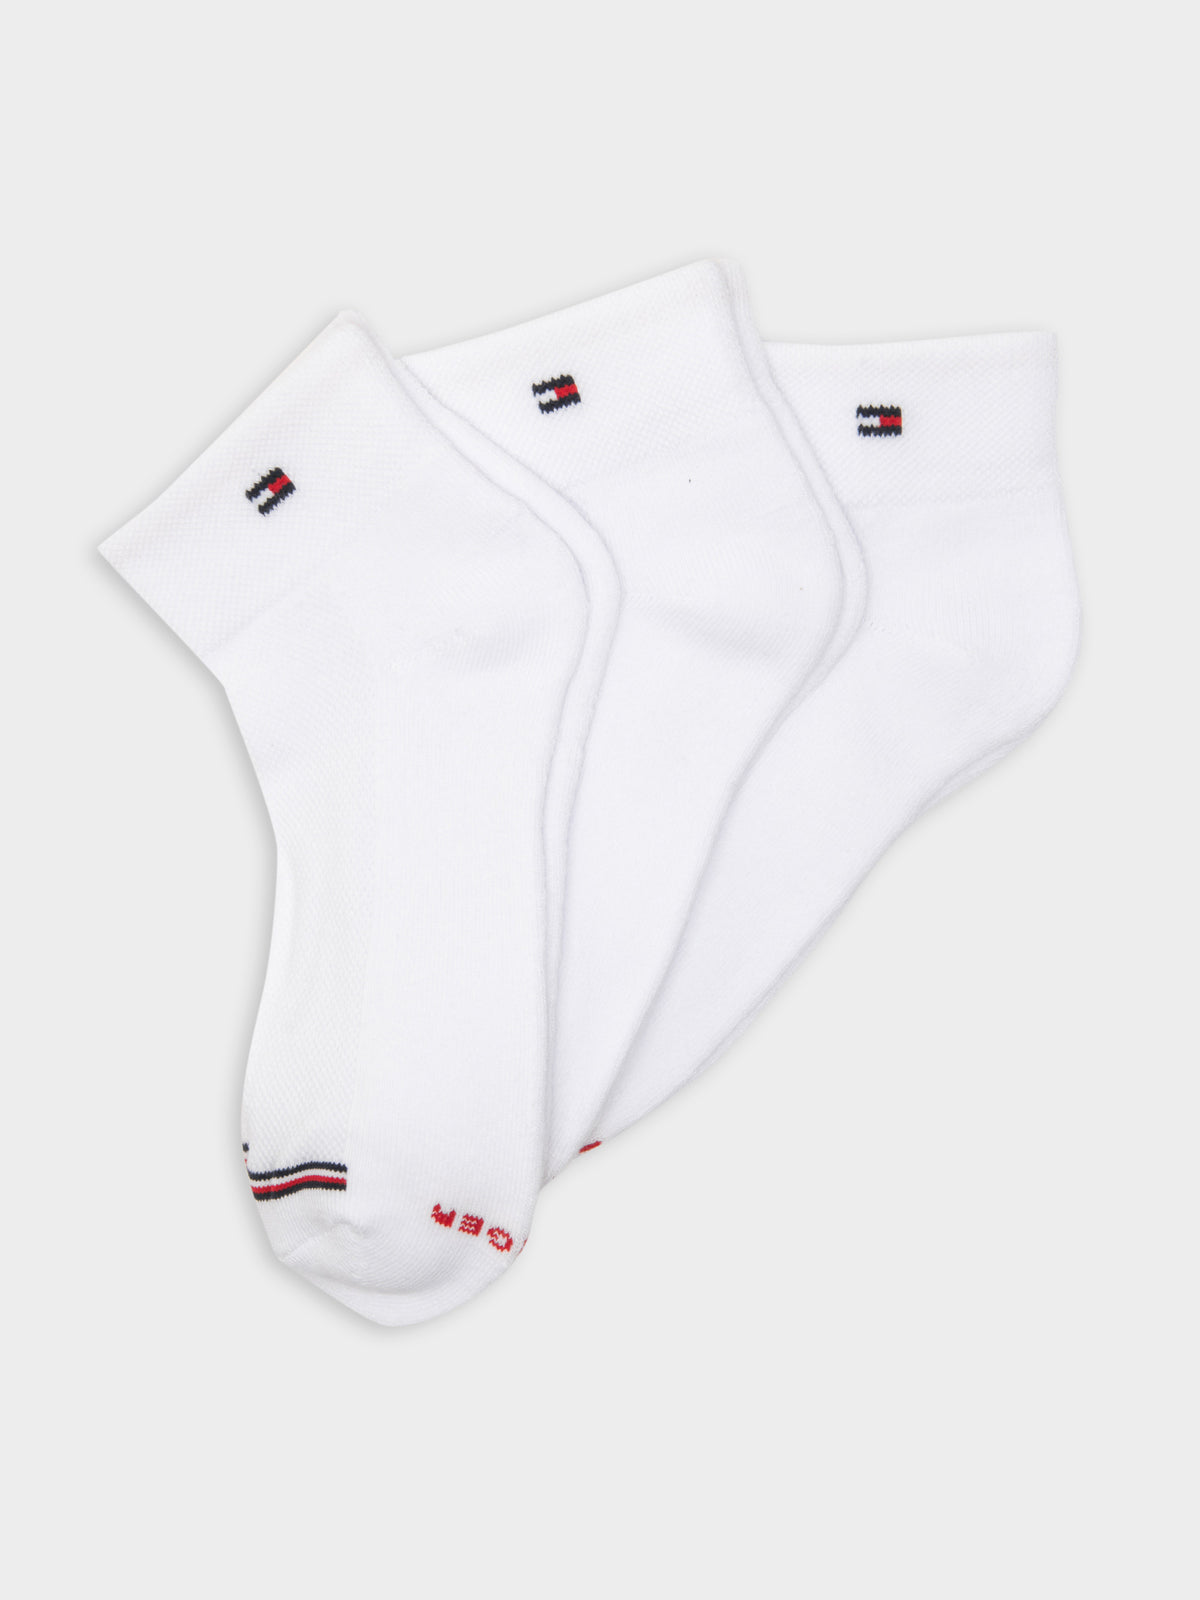 3 Pairs of Cushion Sole Ankle Socks in White